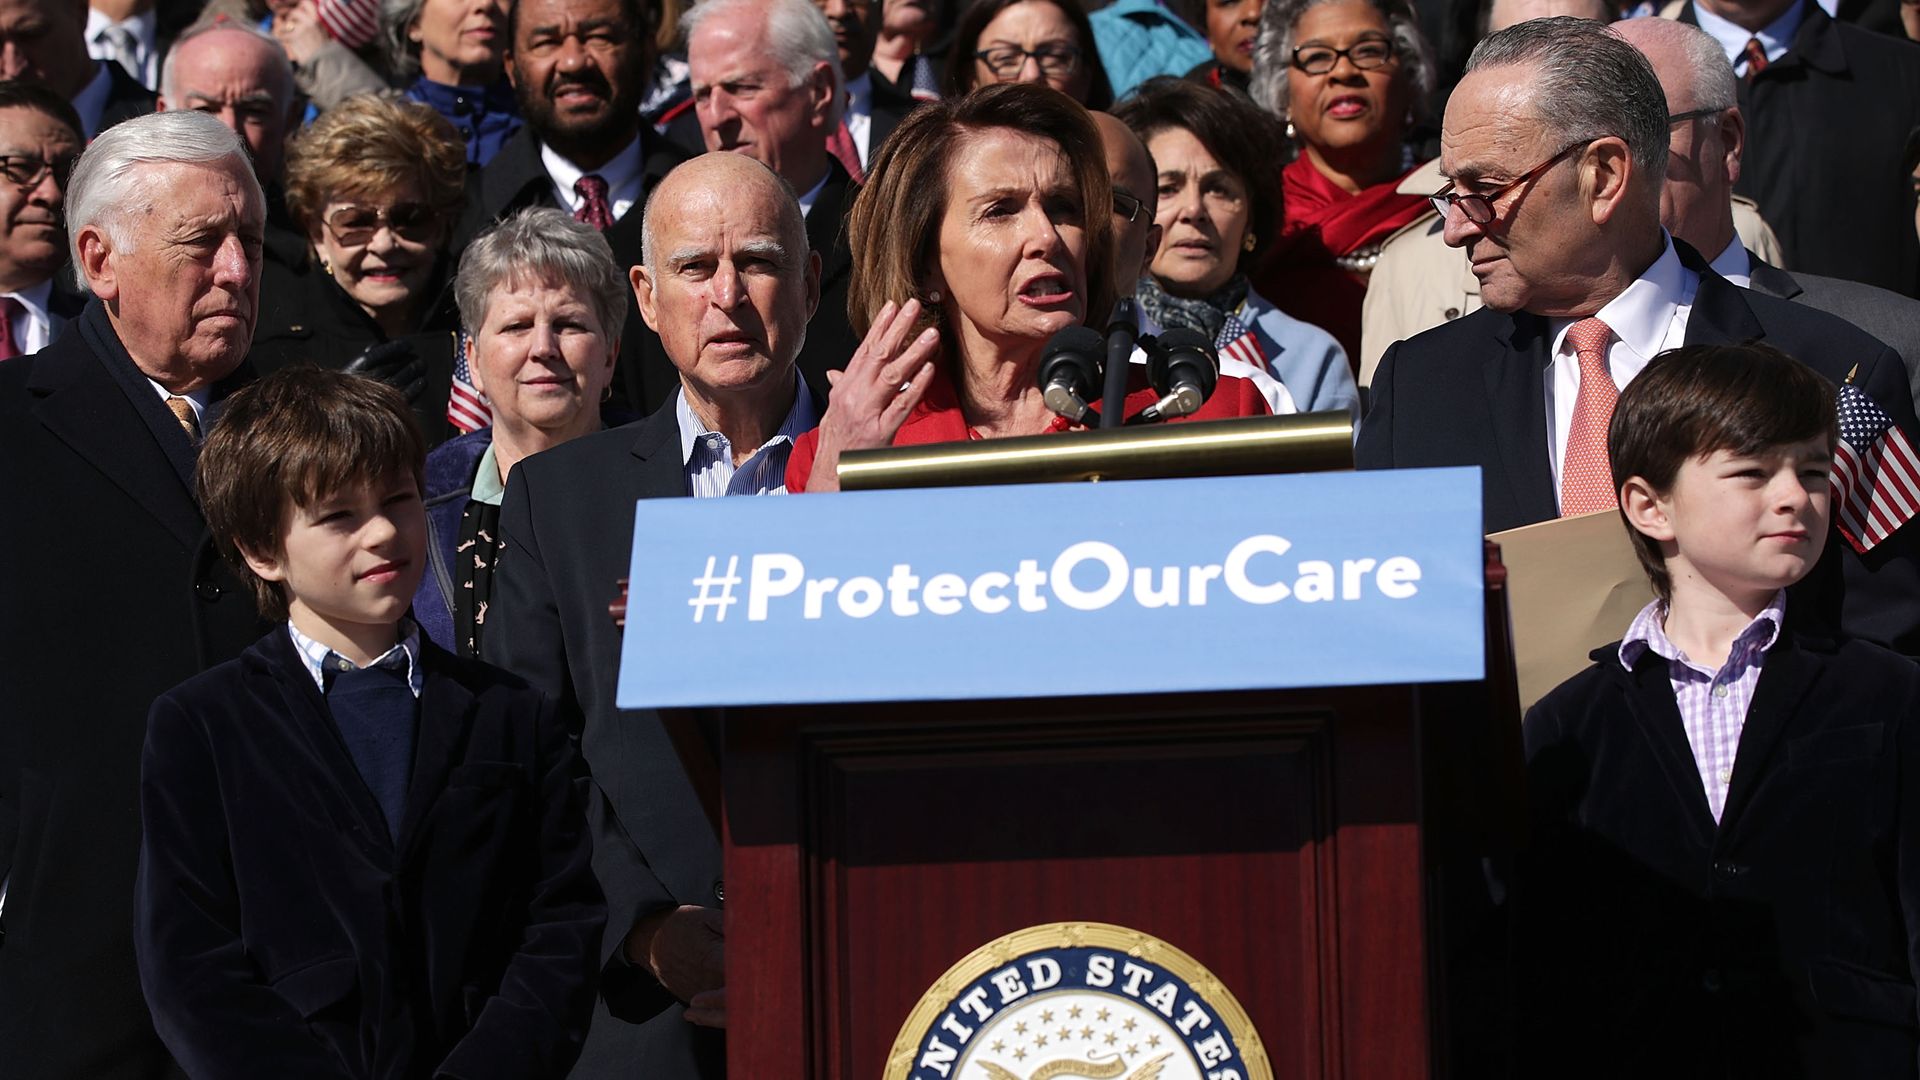 In this image, Nancy Pelosi stands outside with a crowd of lawmakers behind her, at a podium with a sign that reads "#ProtectOurCare."